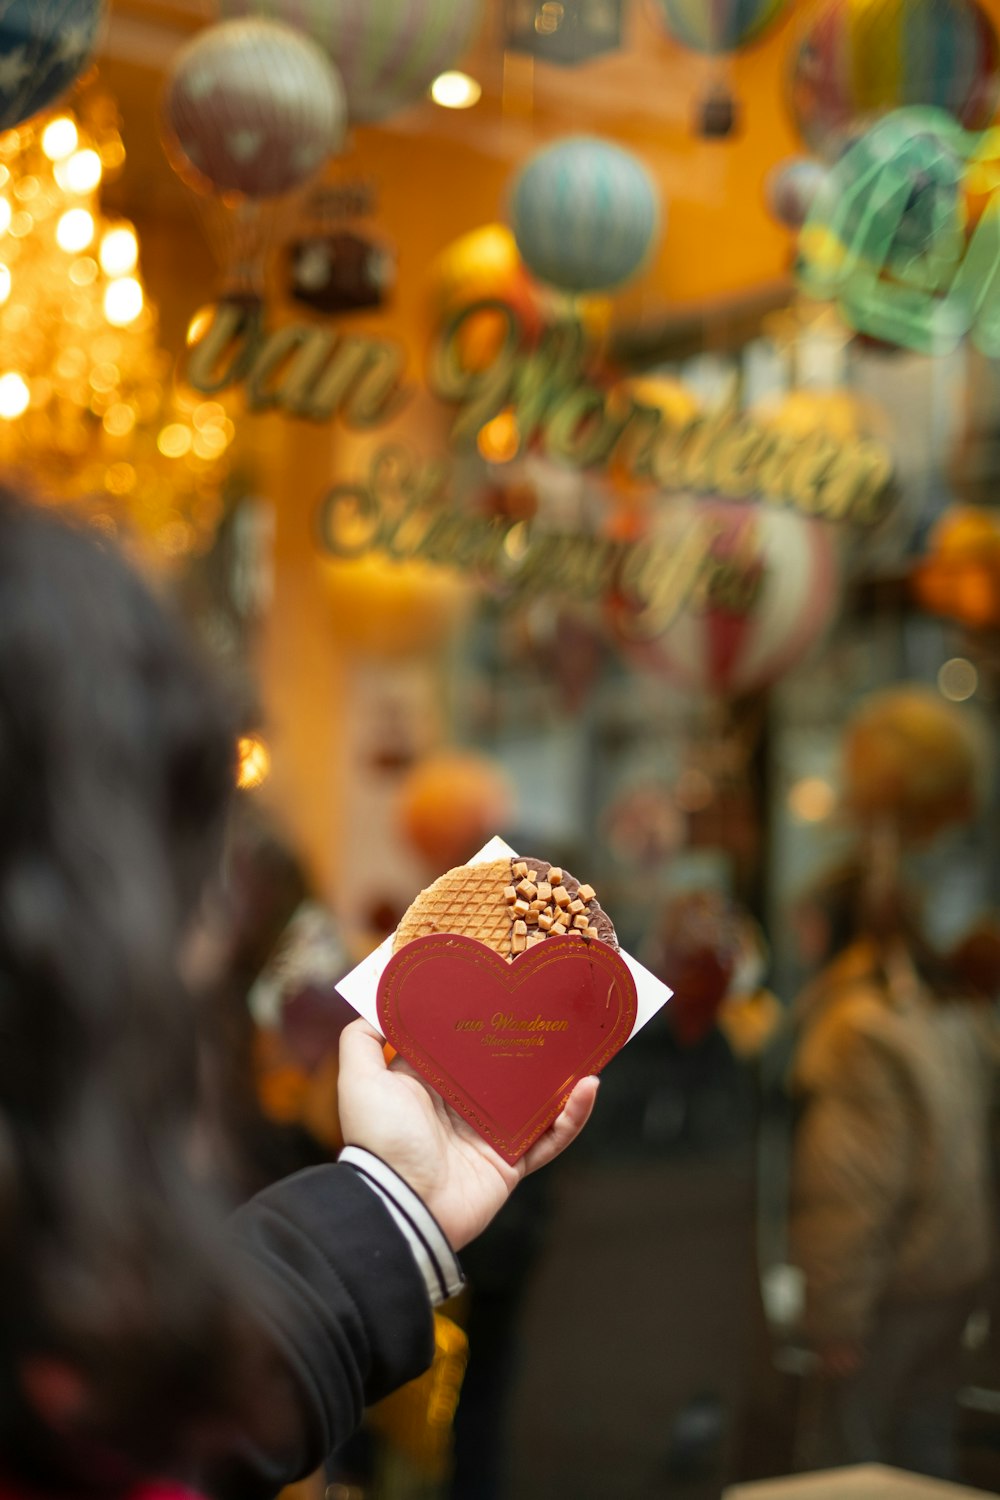 a person holding a heart shaped pastry in front of a store window